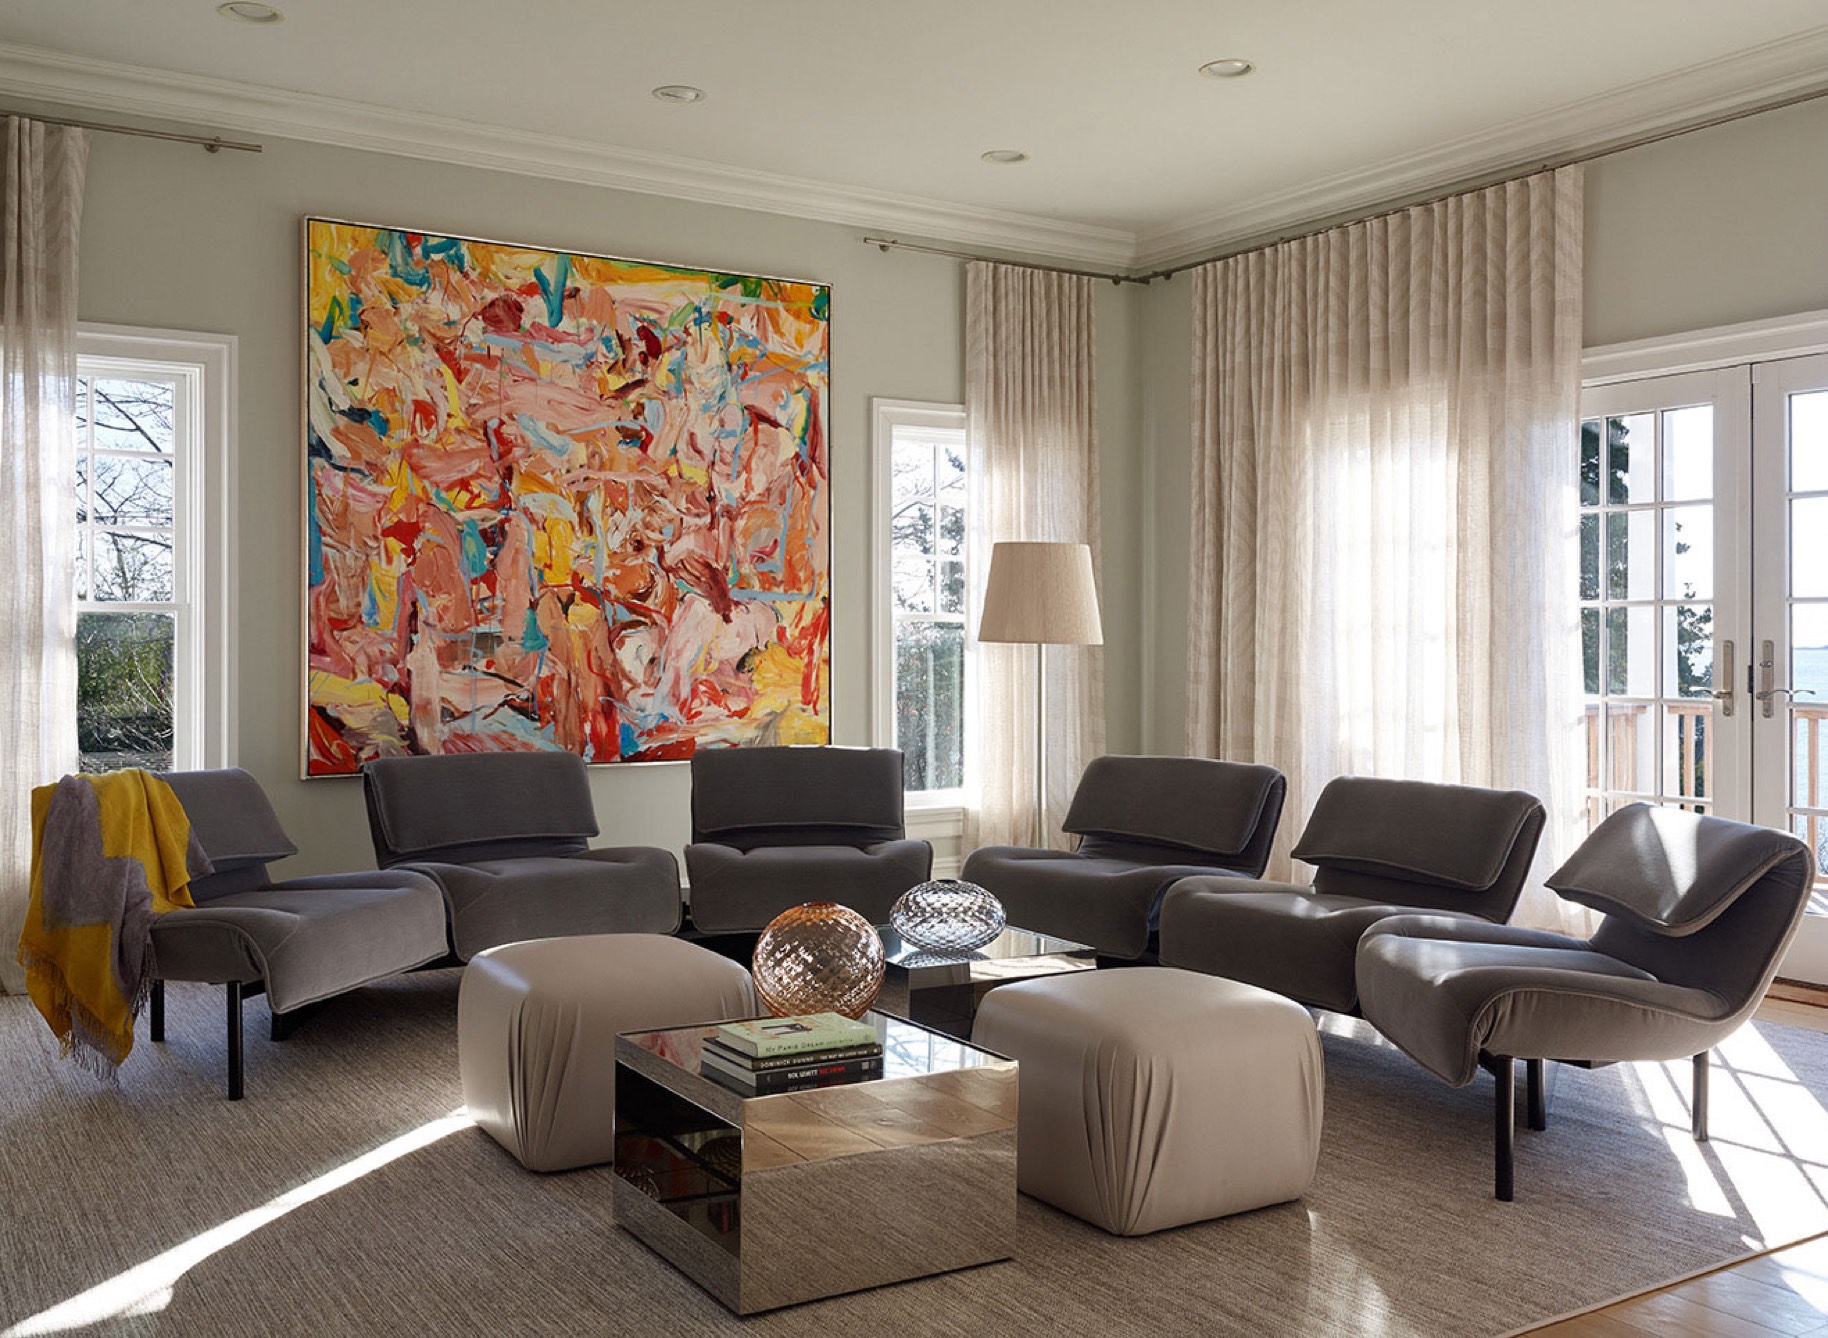 View of a Living room with Grey Chairs Organized in a Circle and a Large Abstract Painting.